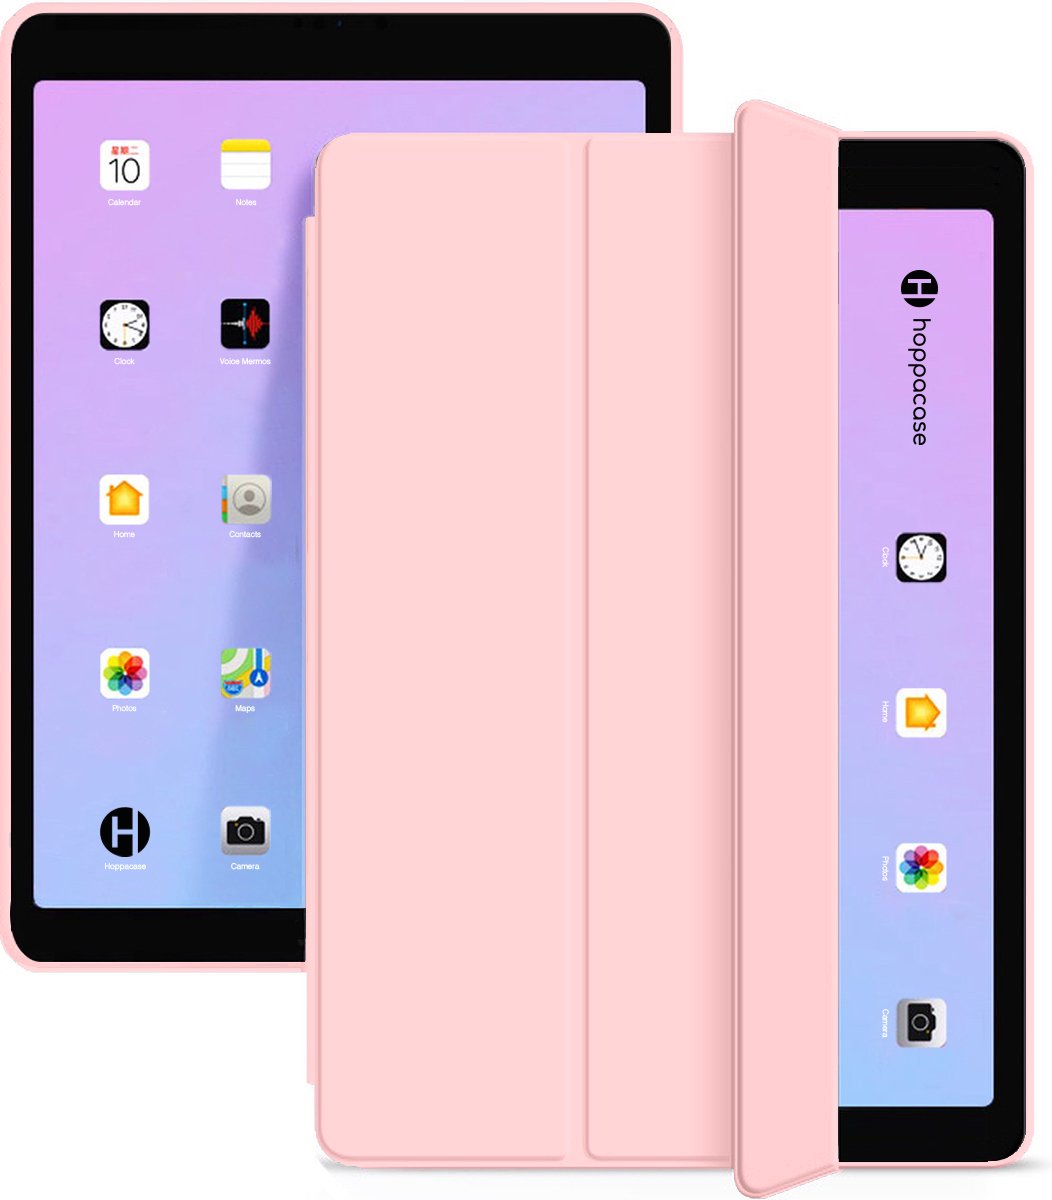 iPad Air 1 2013 / Air 2 2014 hoes - iPad 9.7 inch hoes - Smart Case - Roze